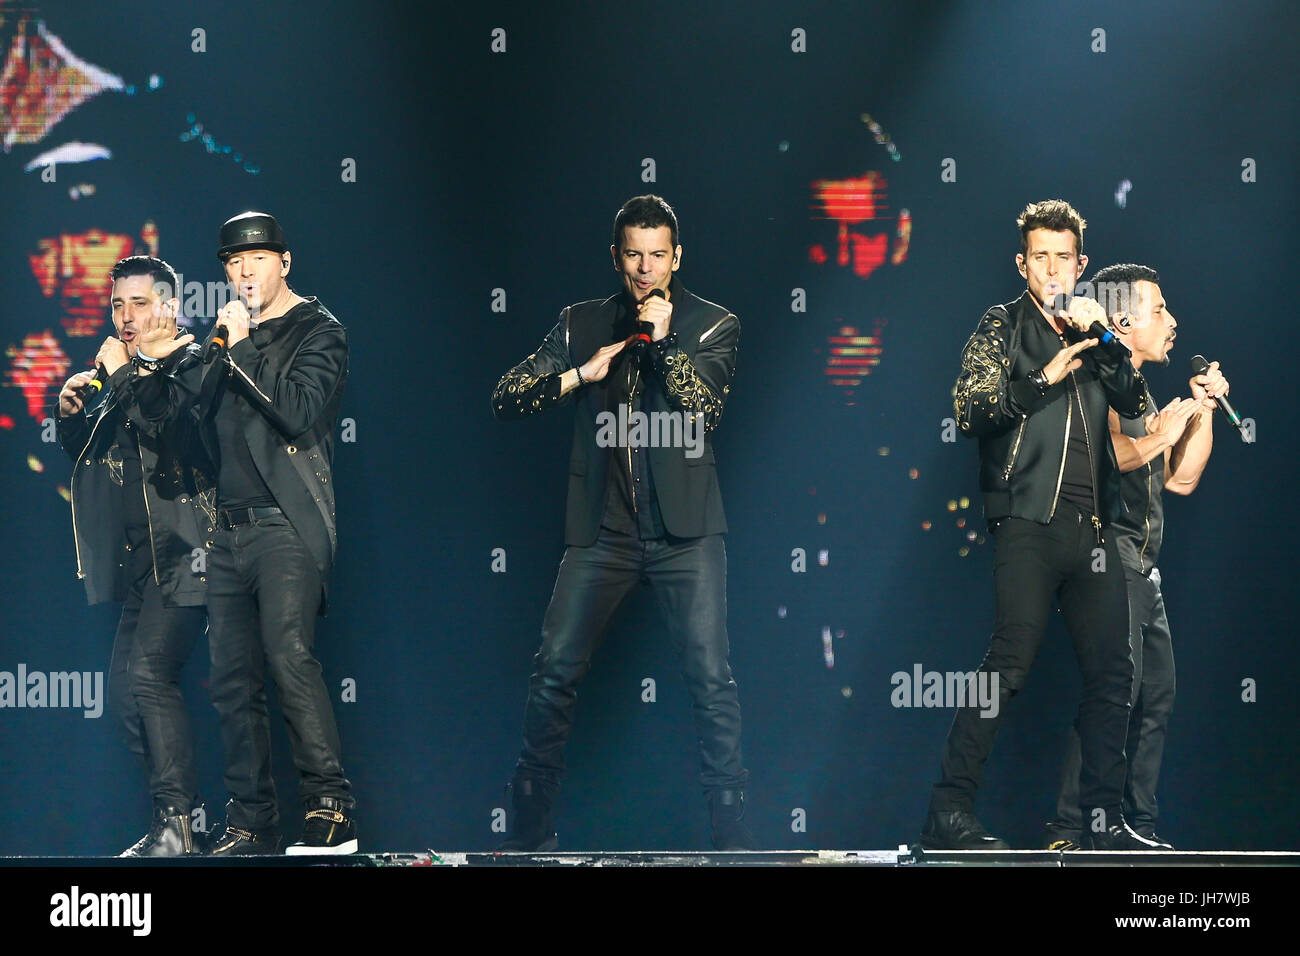 NEW YORK-JUL 7: (L-R) Jonathan Knight, Donnie Wahlberg, Jordan Knight, Joey McIntyre and Danny Wood of New Kids on the Block perform during The Total  Stock Photo